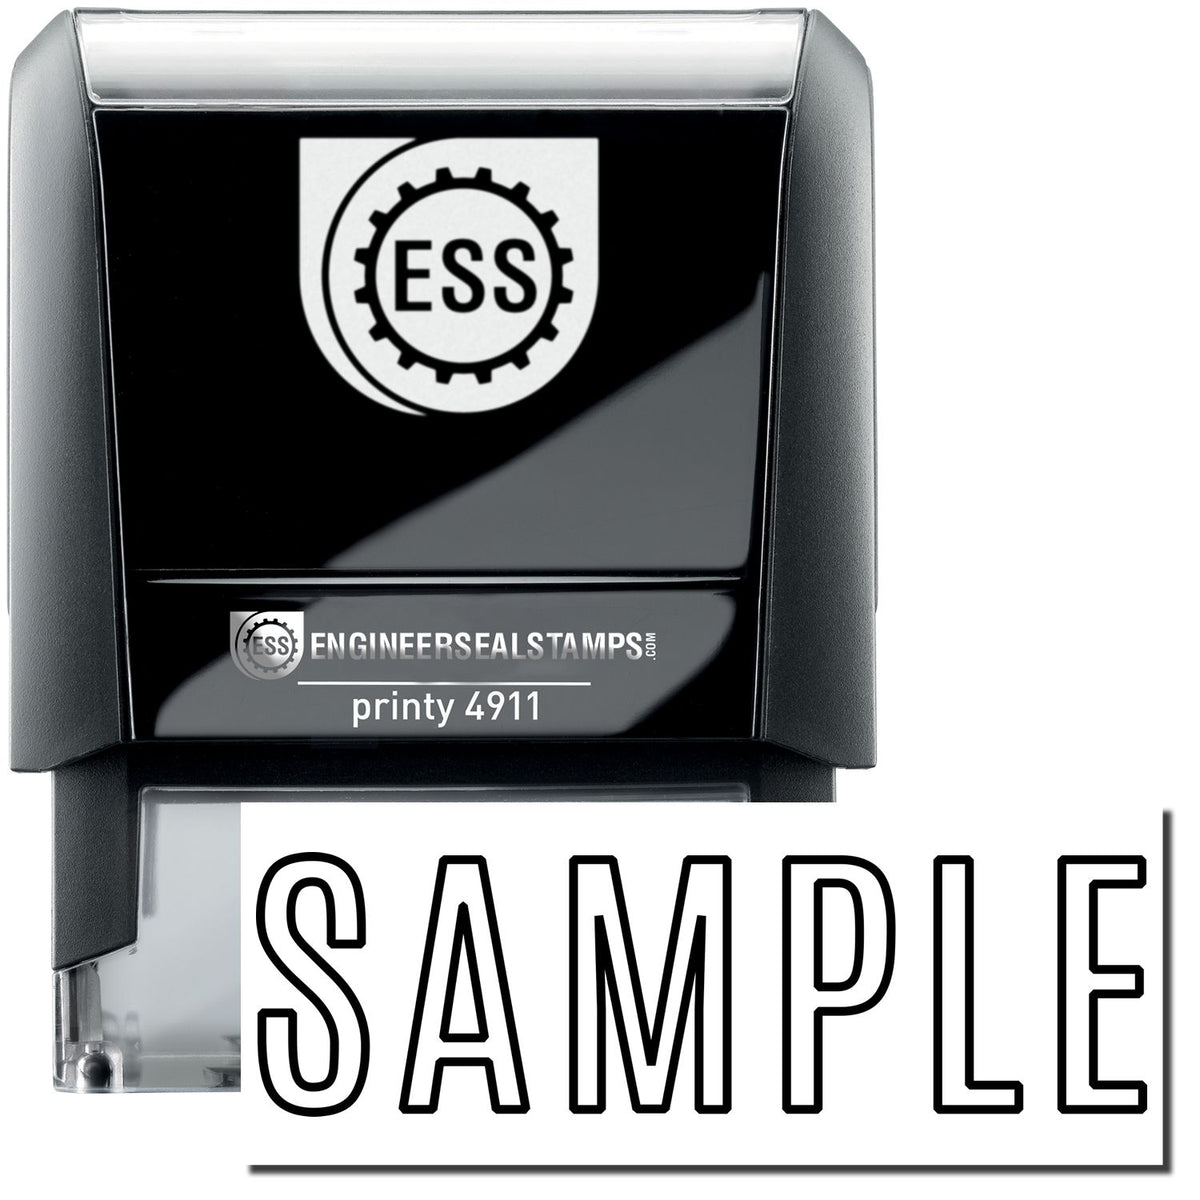 A self-inking stamp with a stamped image showing how the text &quot;SAMPLE&quot; in an outline style is displayed after stamping.